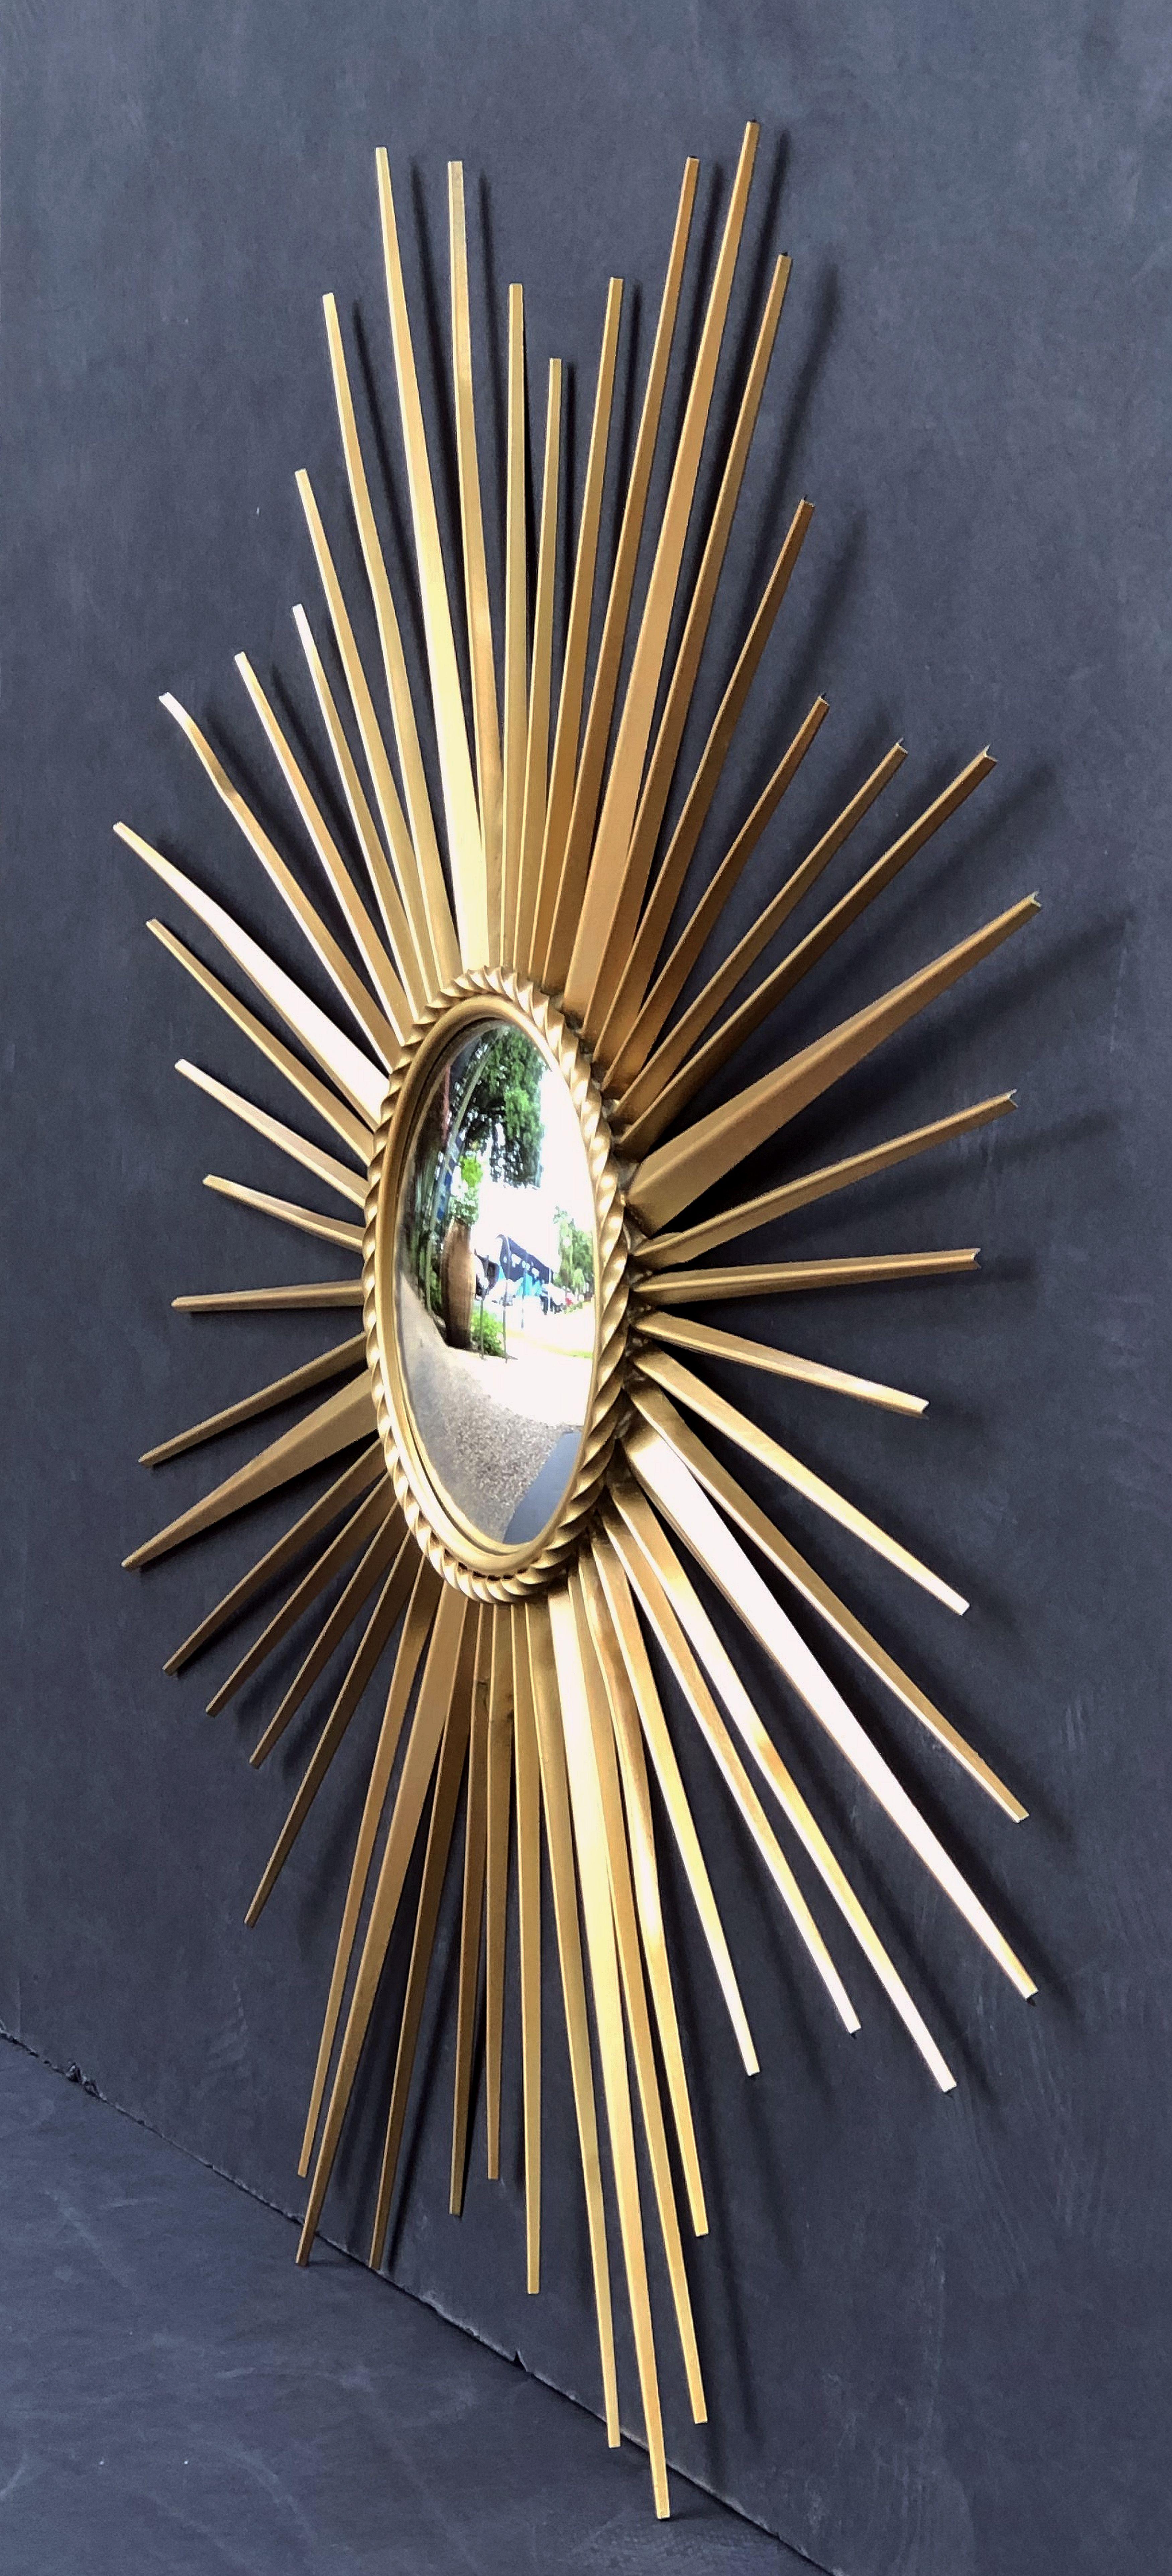 French Gilt Metal Sunburst or Starburst Mirror by Chaty Vallauris (Dia 33 3/4) In Good Condition For Sale In Austin, TX